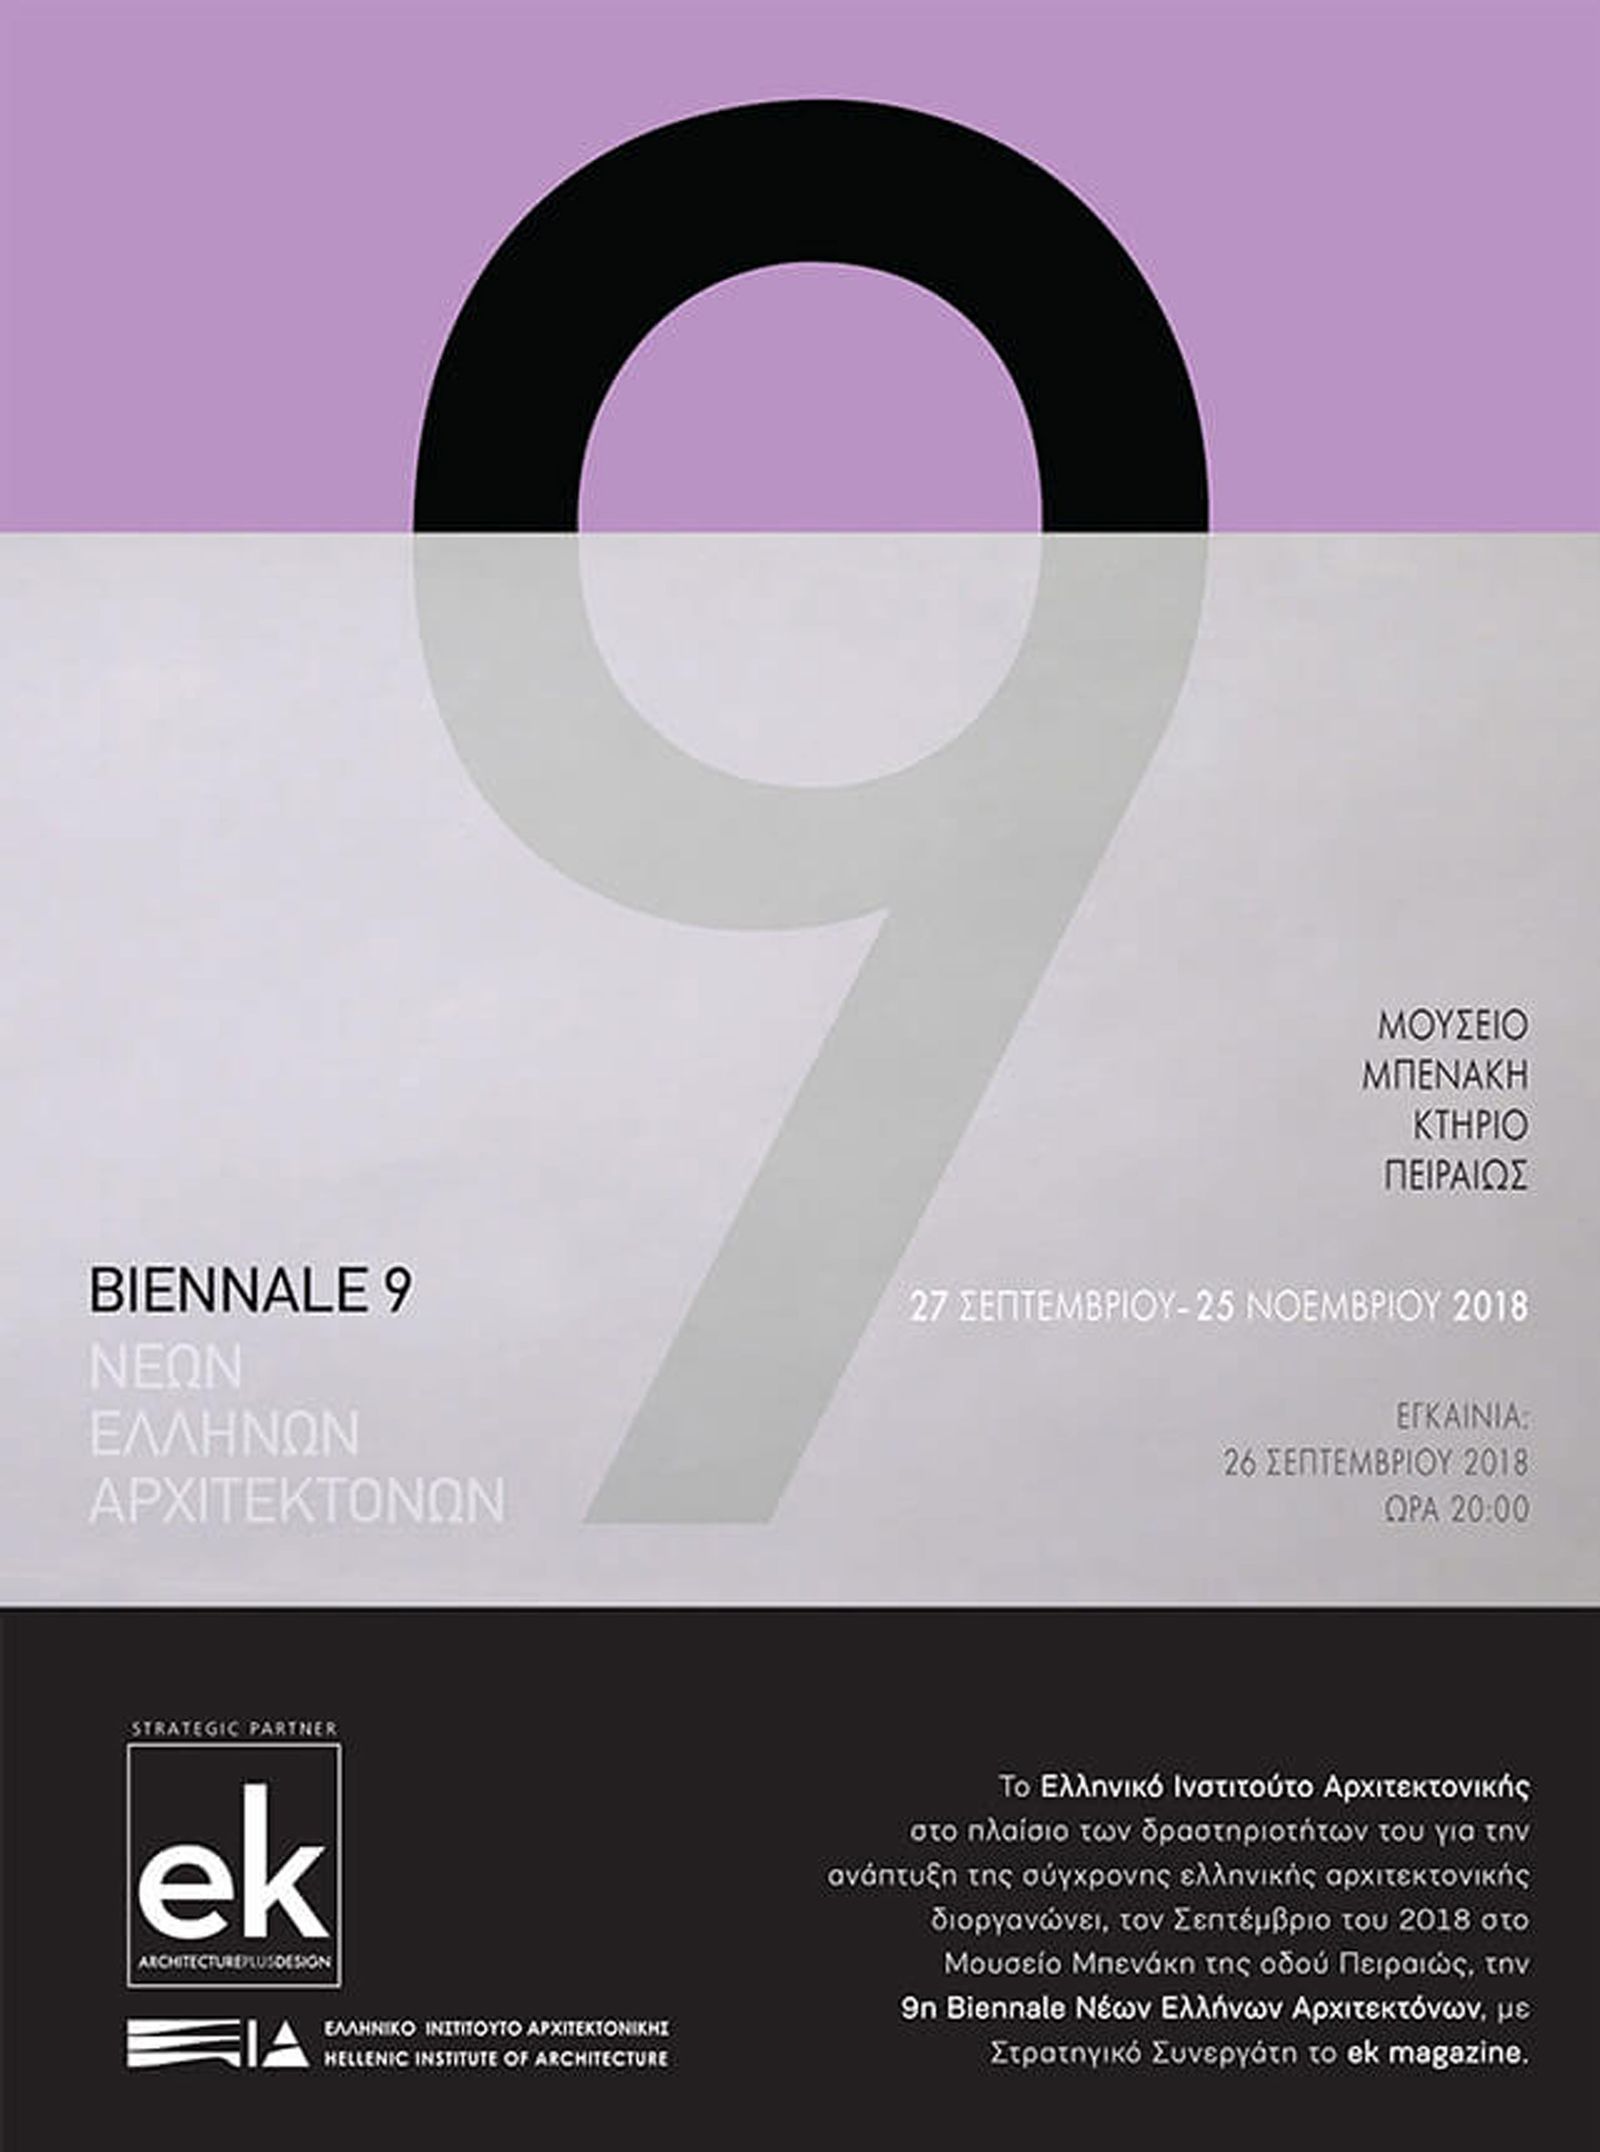 Distinction of project ‘Residence in Diakofto’ at the 9th Biennale of Young Greek Architects, organised by the Hellenic Institute of Architecture